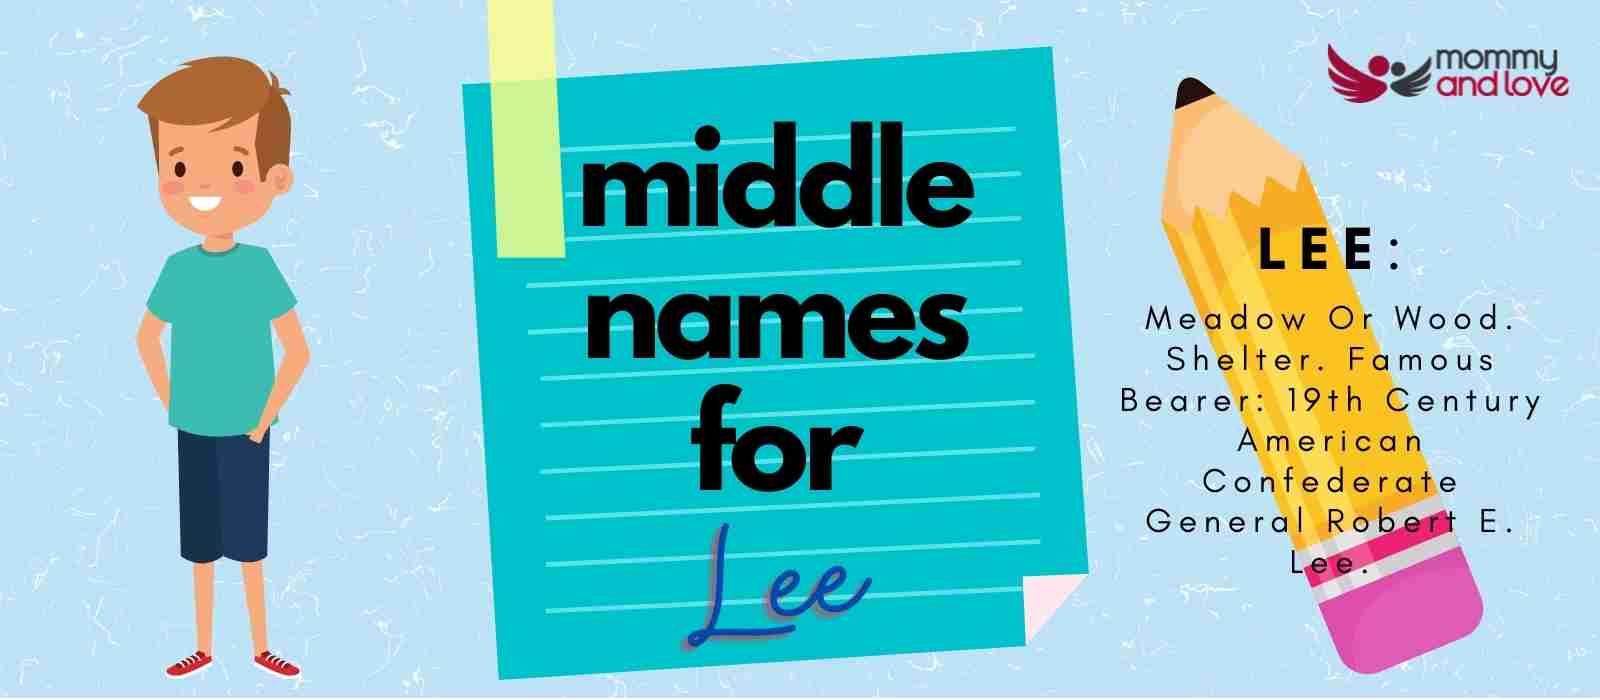 Middle Names for Lee